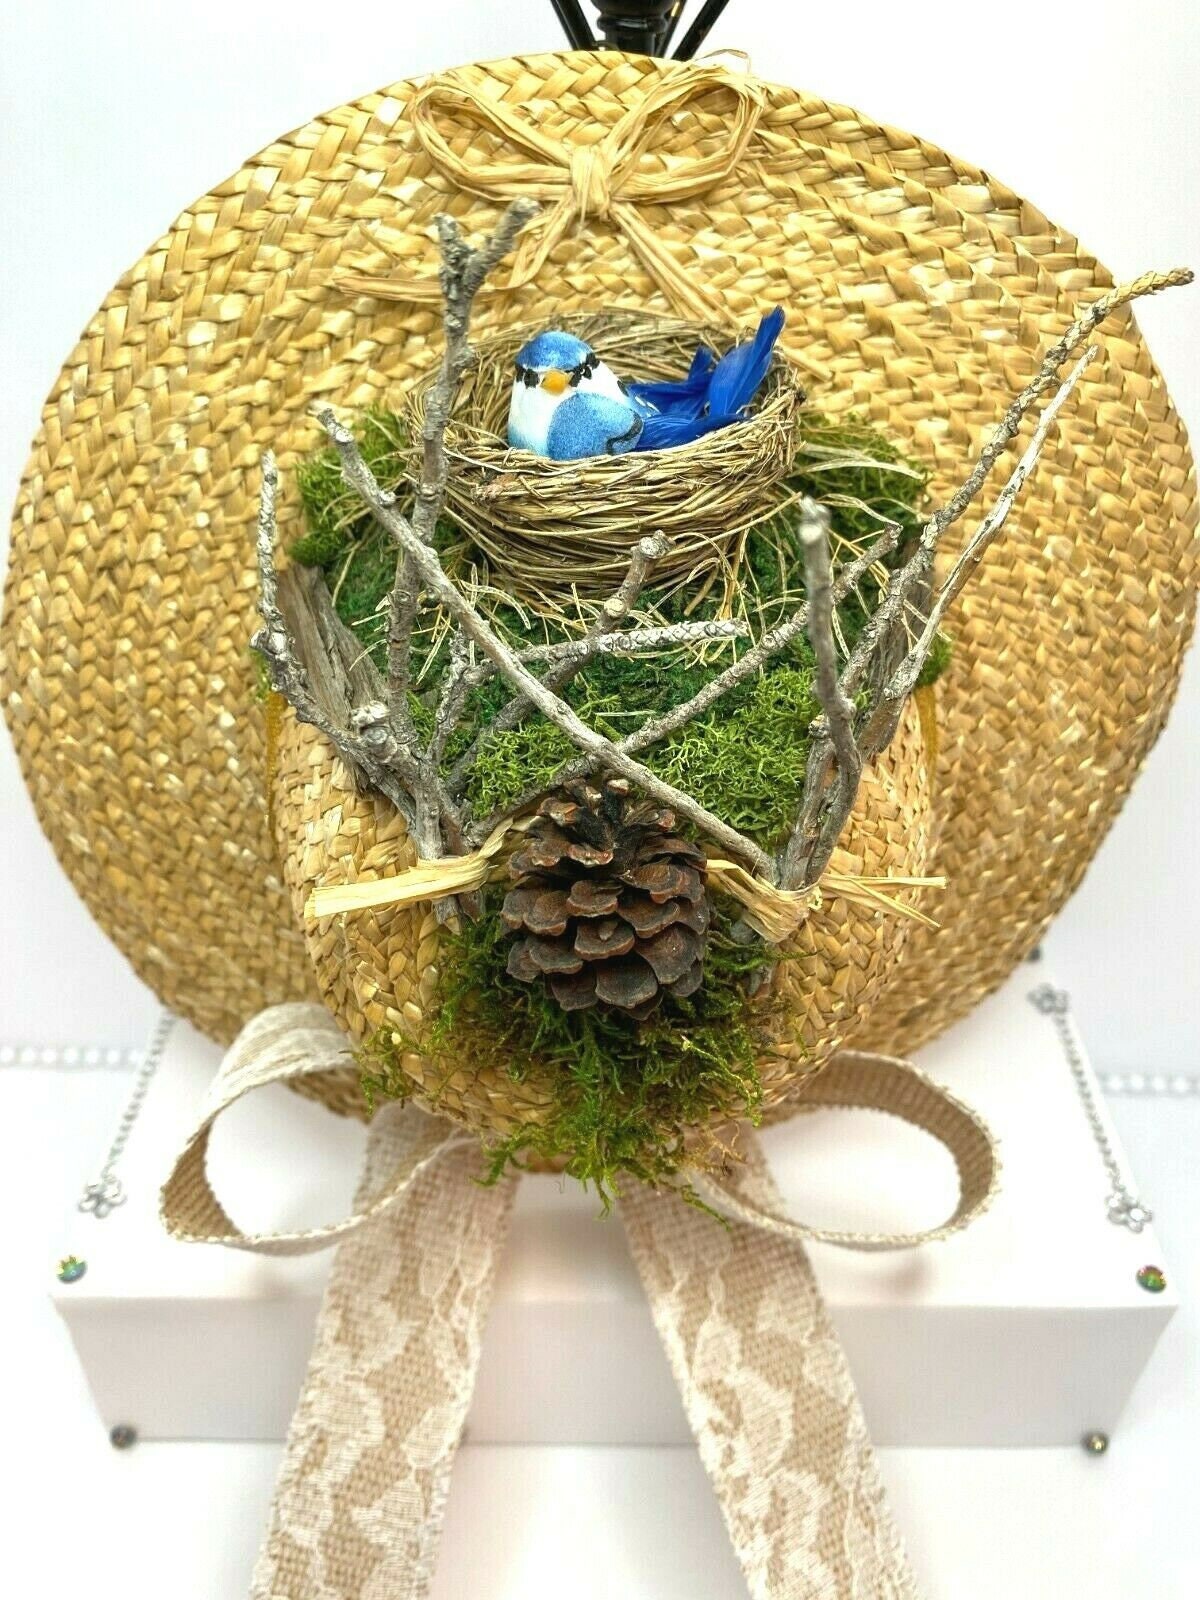 Handmade Straw / Whicker Hat Wall Hanging, Blue Bird In A Nest, Natural Art, Nature Wall Hanging Country Style.